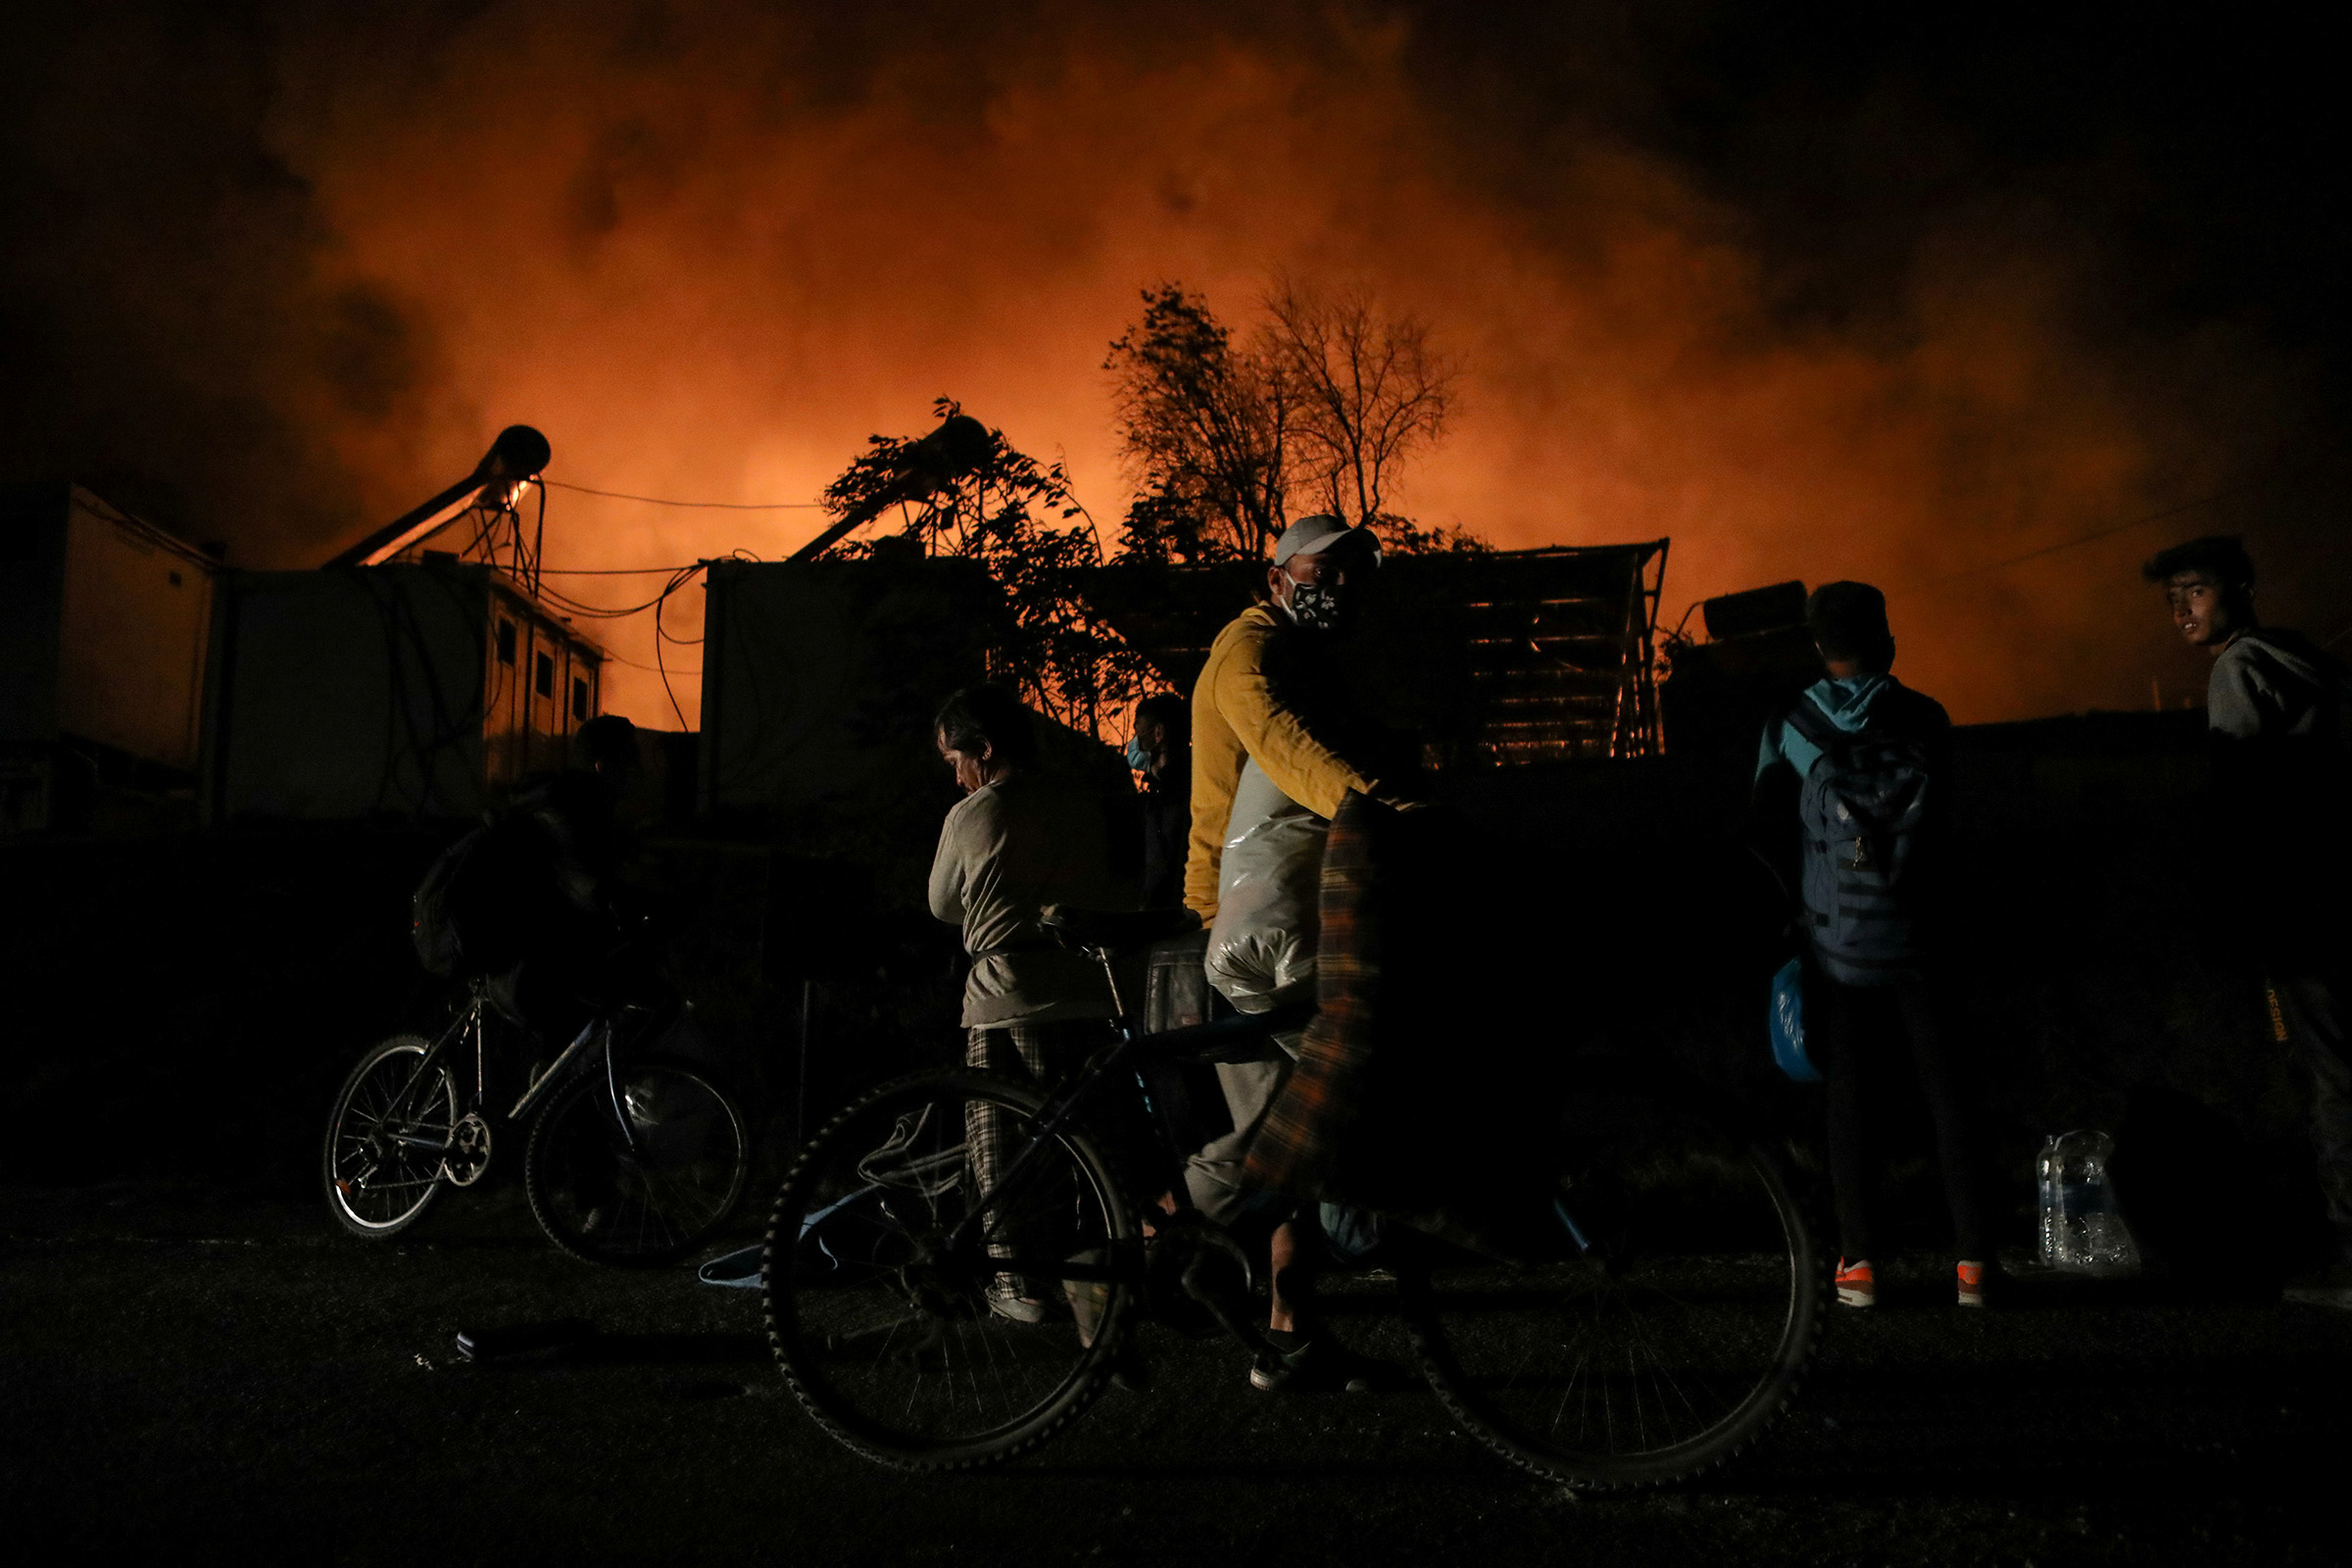 Refugees and migrants carry their belongings as they flee from a fire burning at the Moria camp on the island of Lesbos, Greece, on Sept. 9, 2020. (Elias Marcou—Reuters)